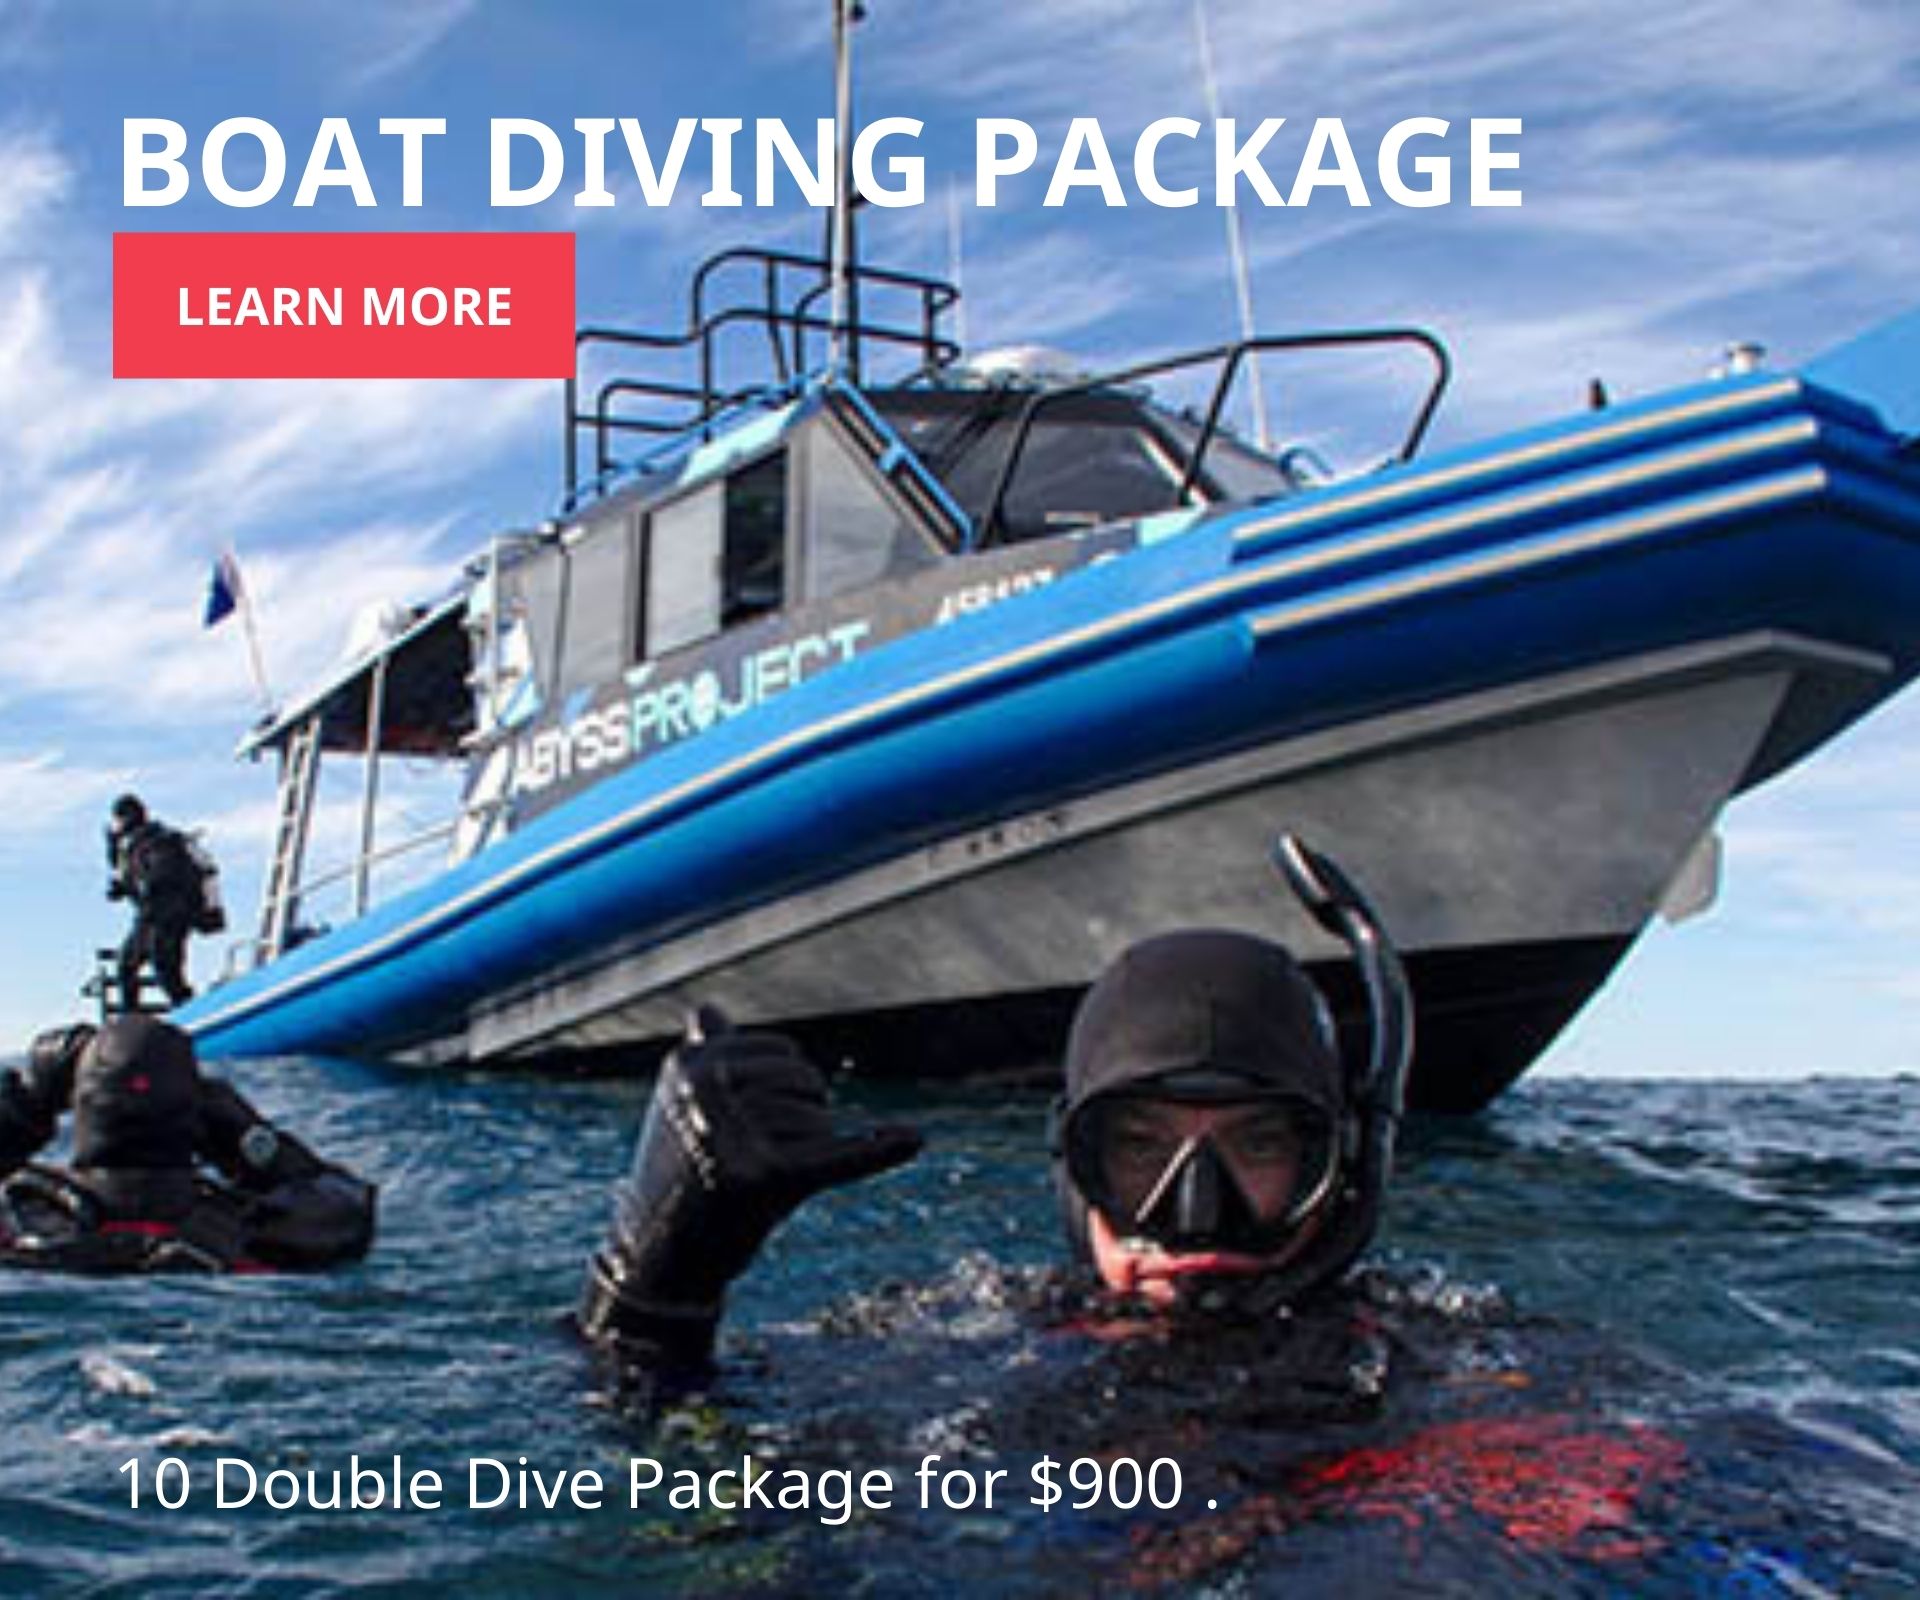 Boat Diving Package